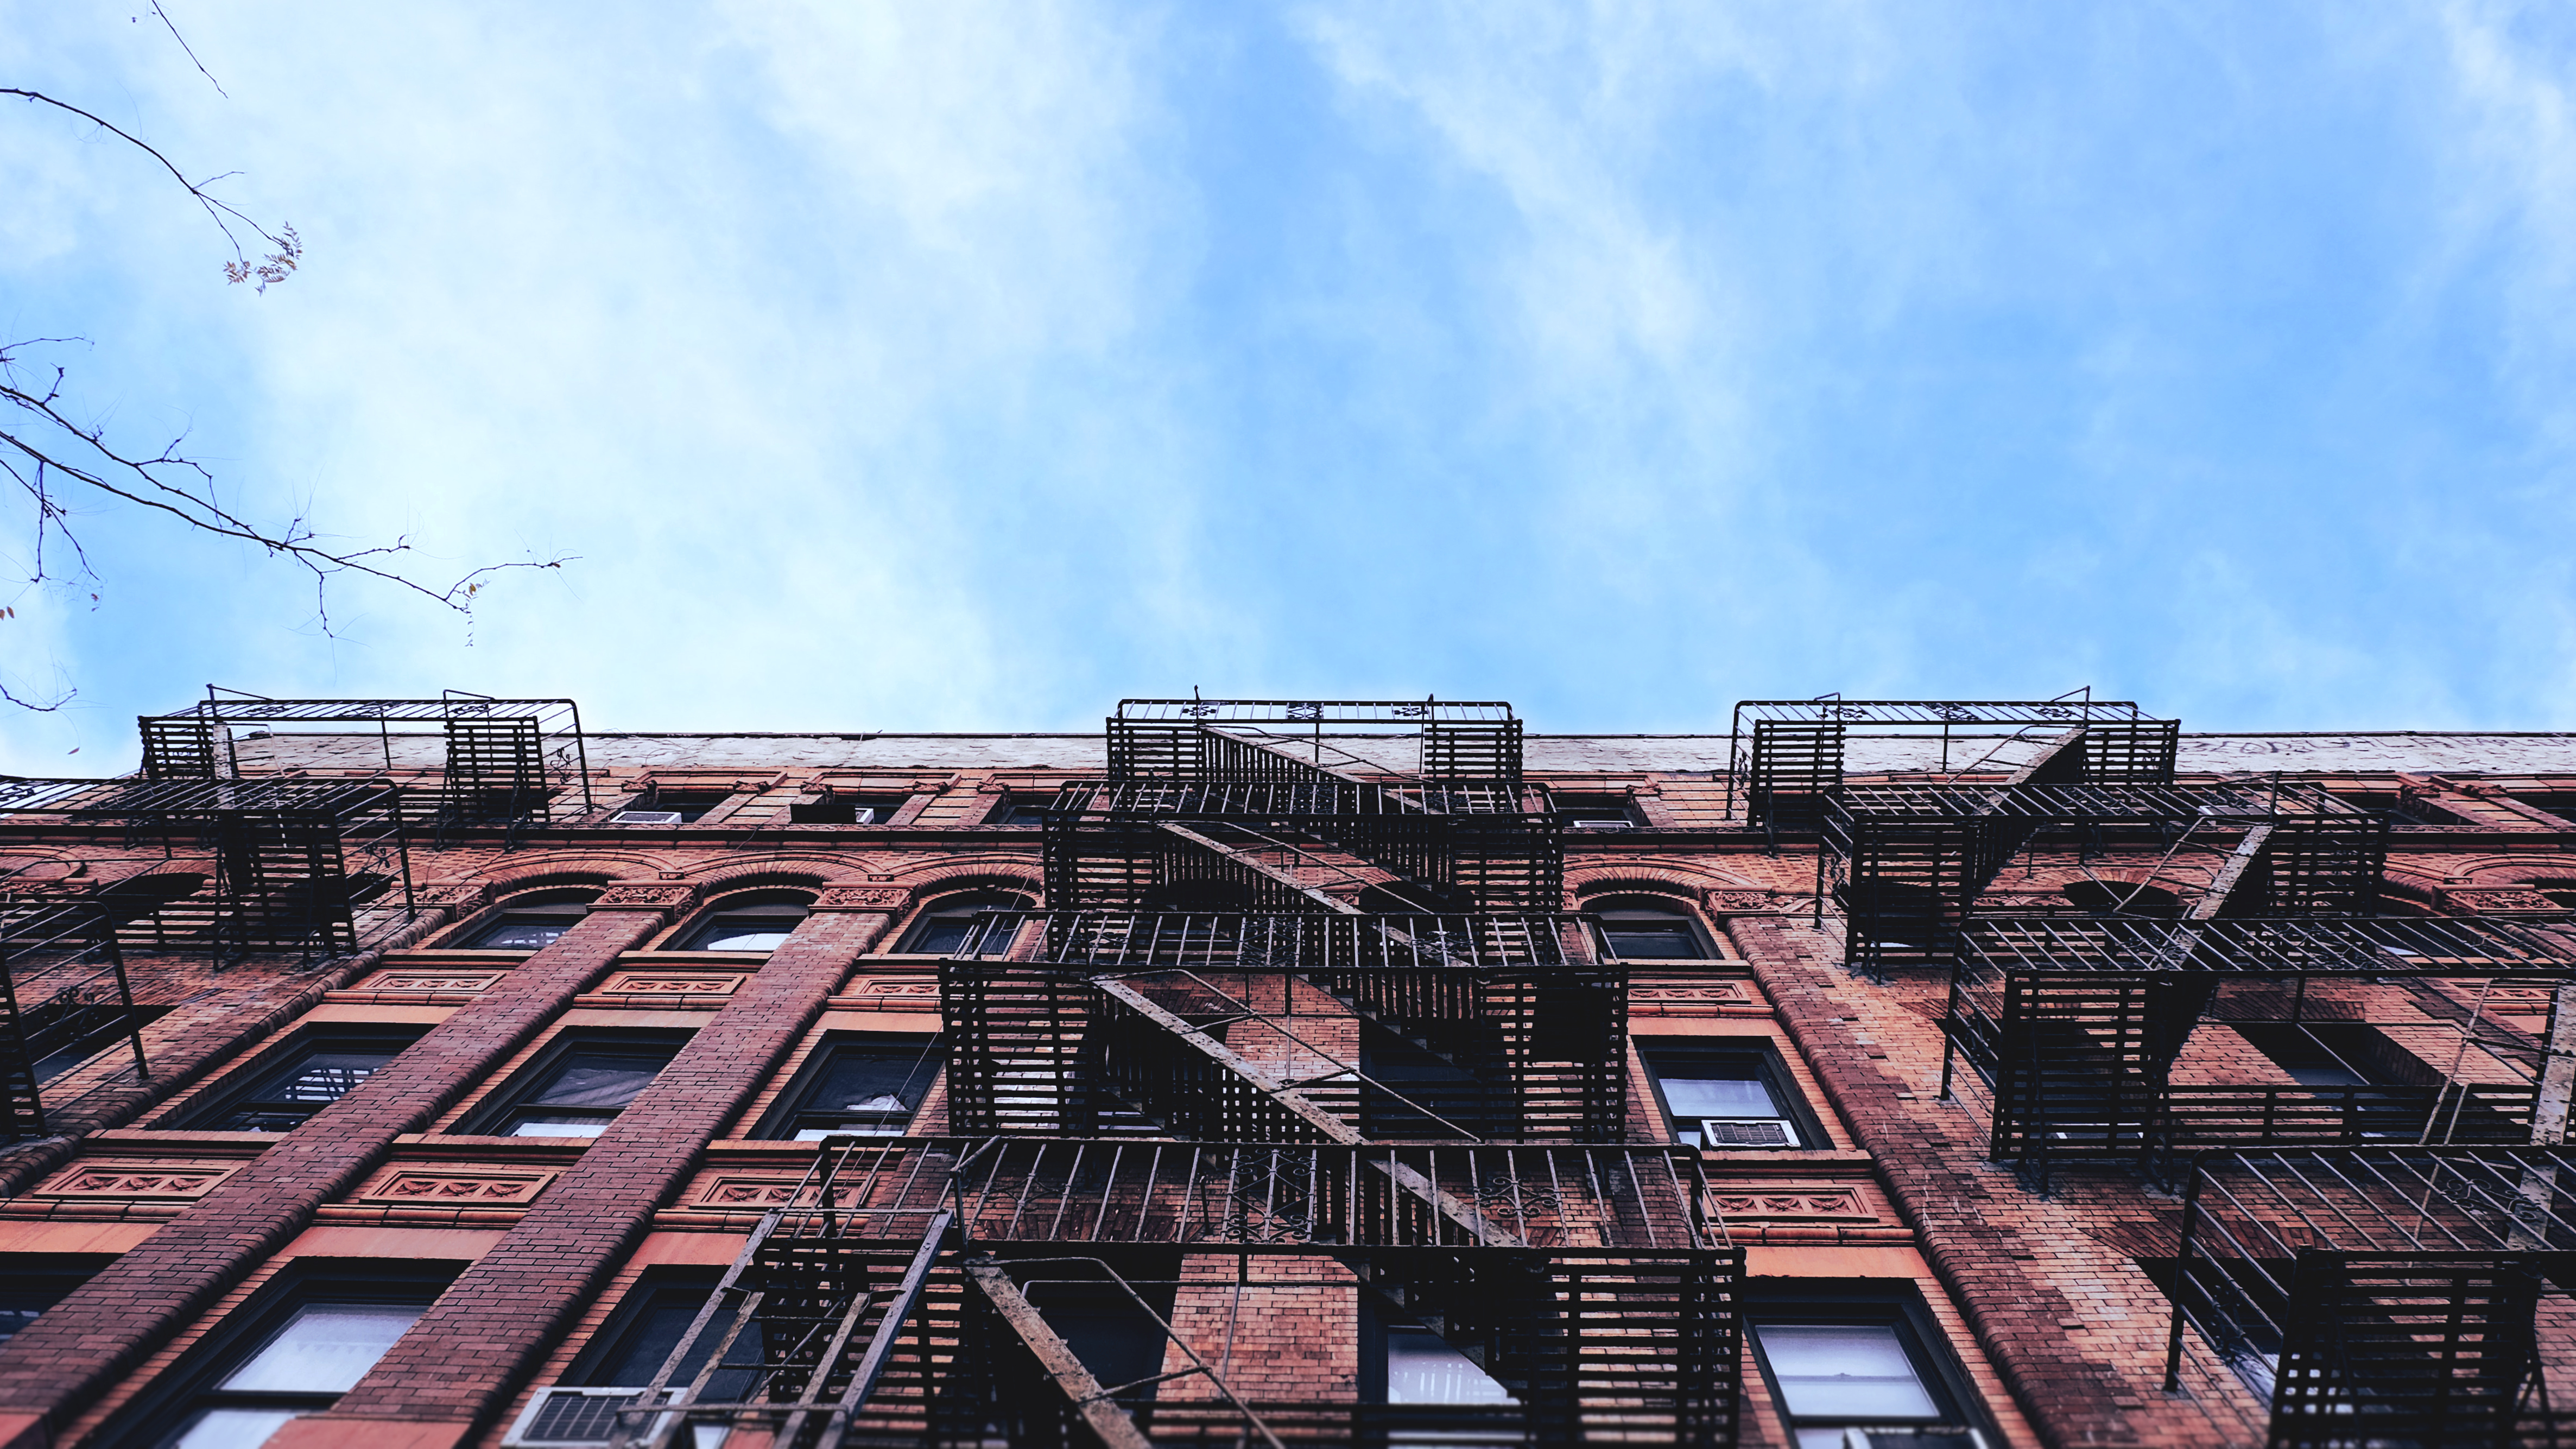 Facade Clouds Sky Apartments Bricks Stairs 4745x2669